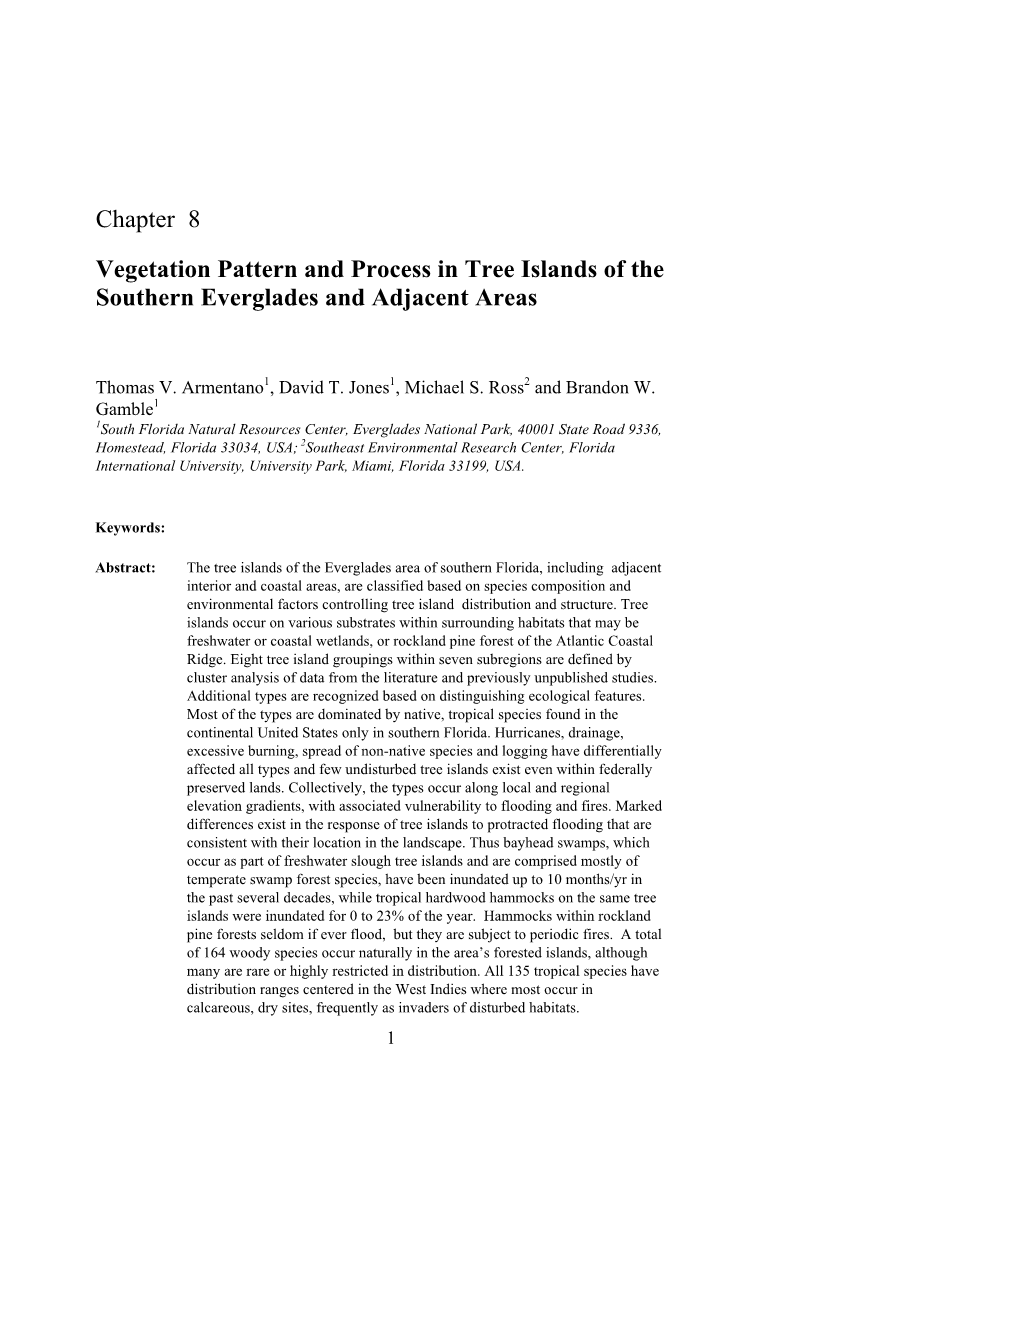 Chapter 8 Vegetation Pattern and Process in Tree Islands of the Southern Everglades and Adjacent Areas